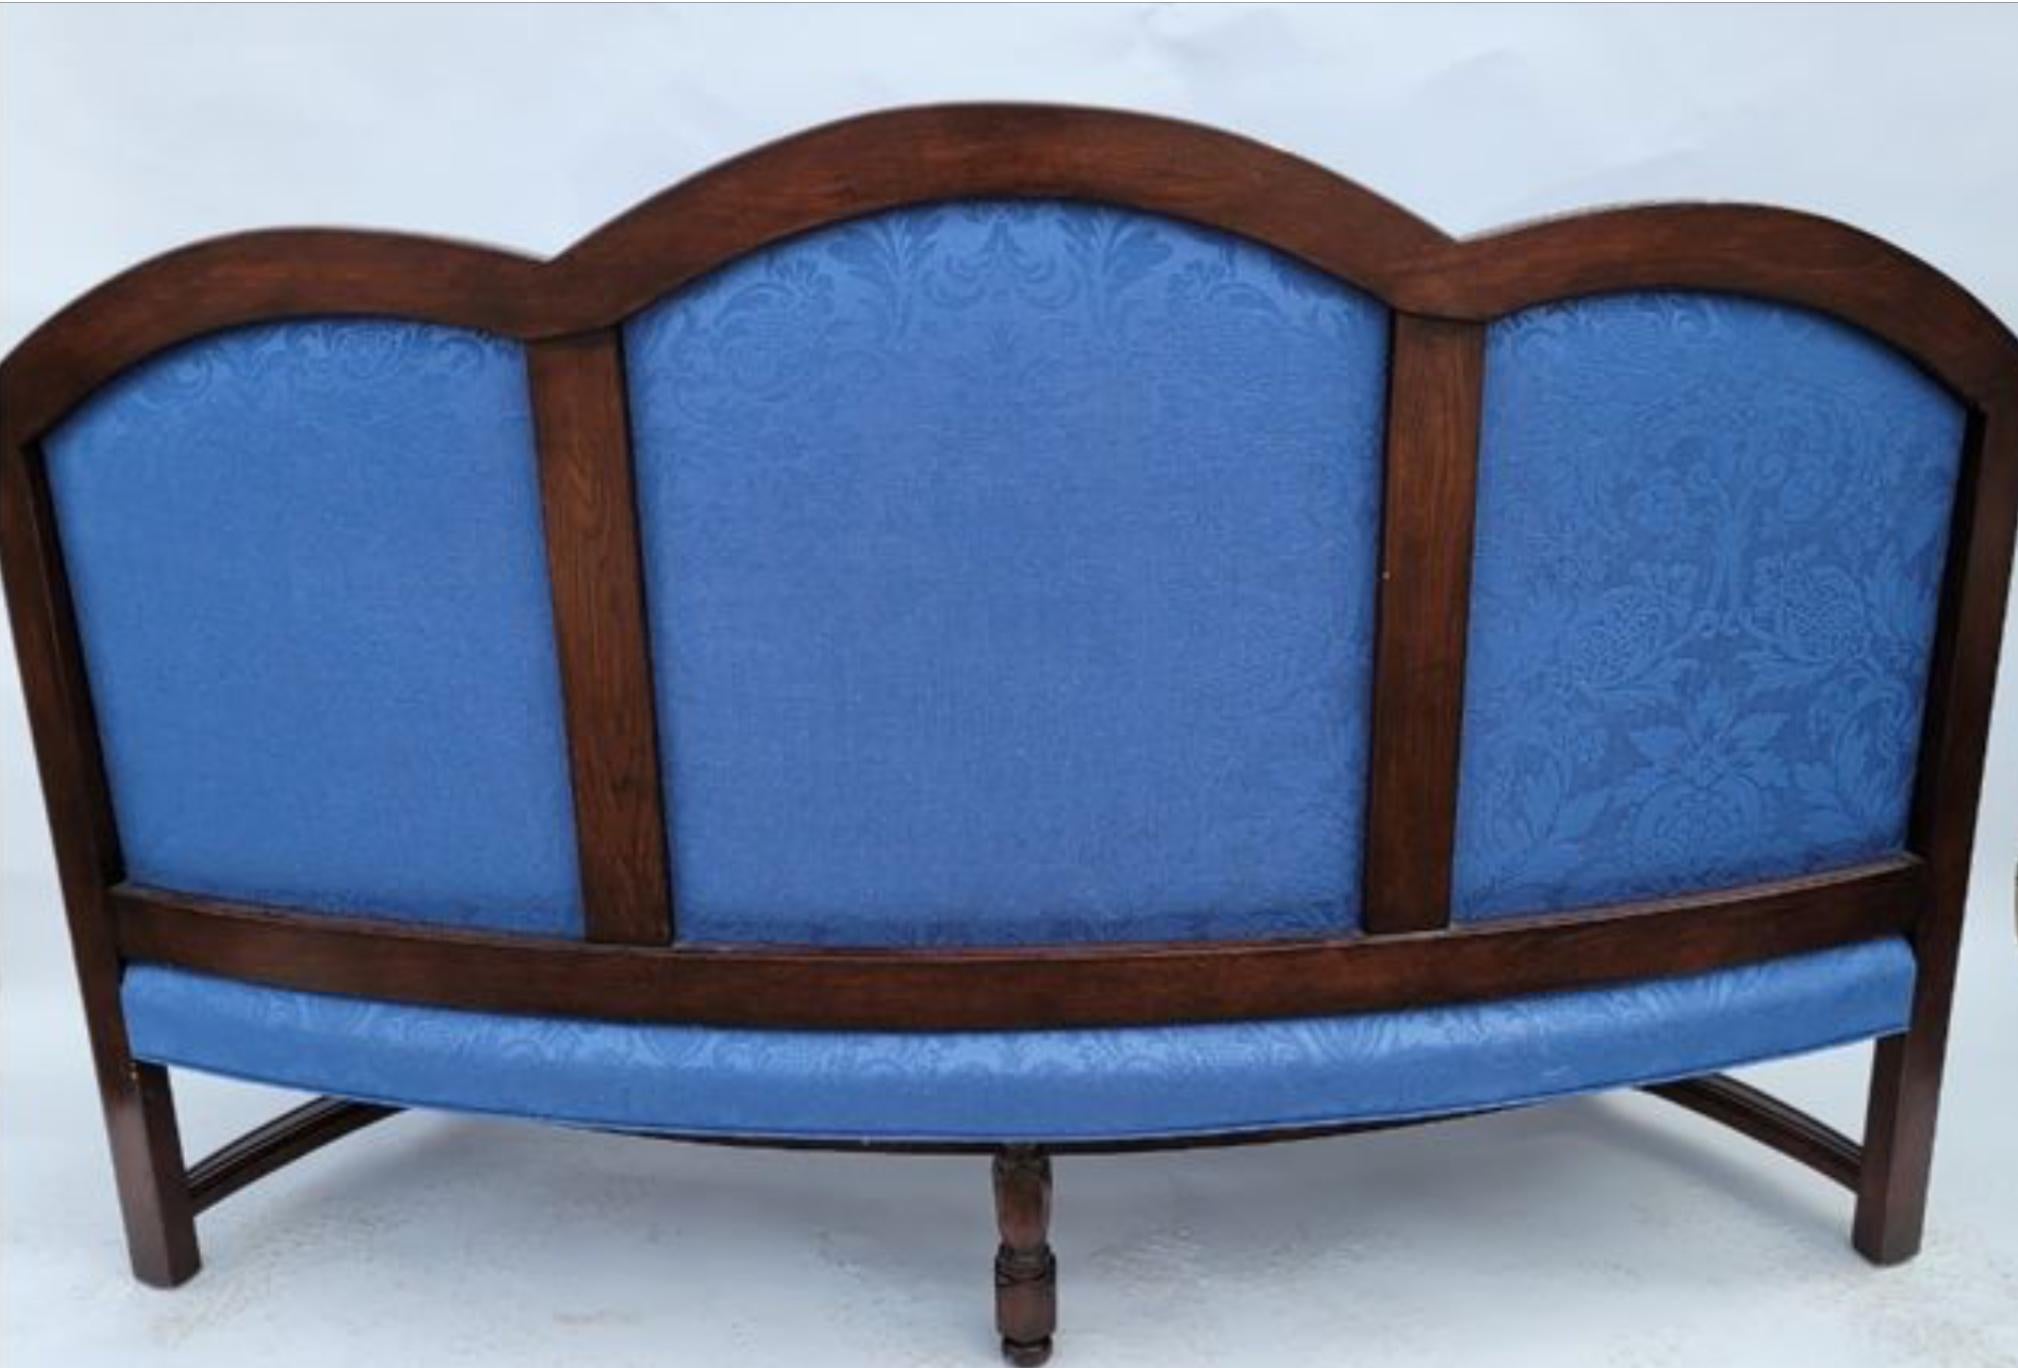 Spanish Colonial 18th C Style Carved Walnut Schumacher Blue Damask Curved Sofa Settee For Sale